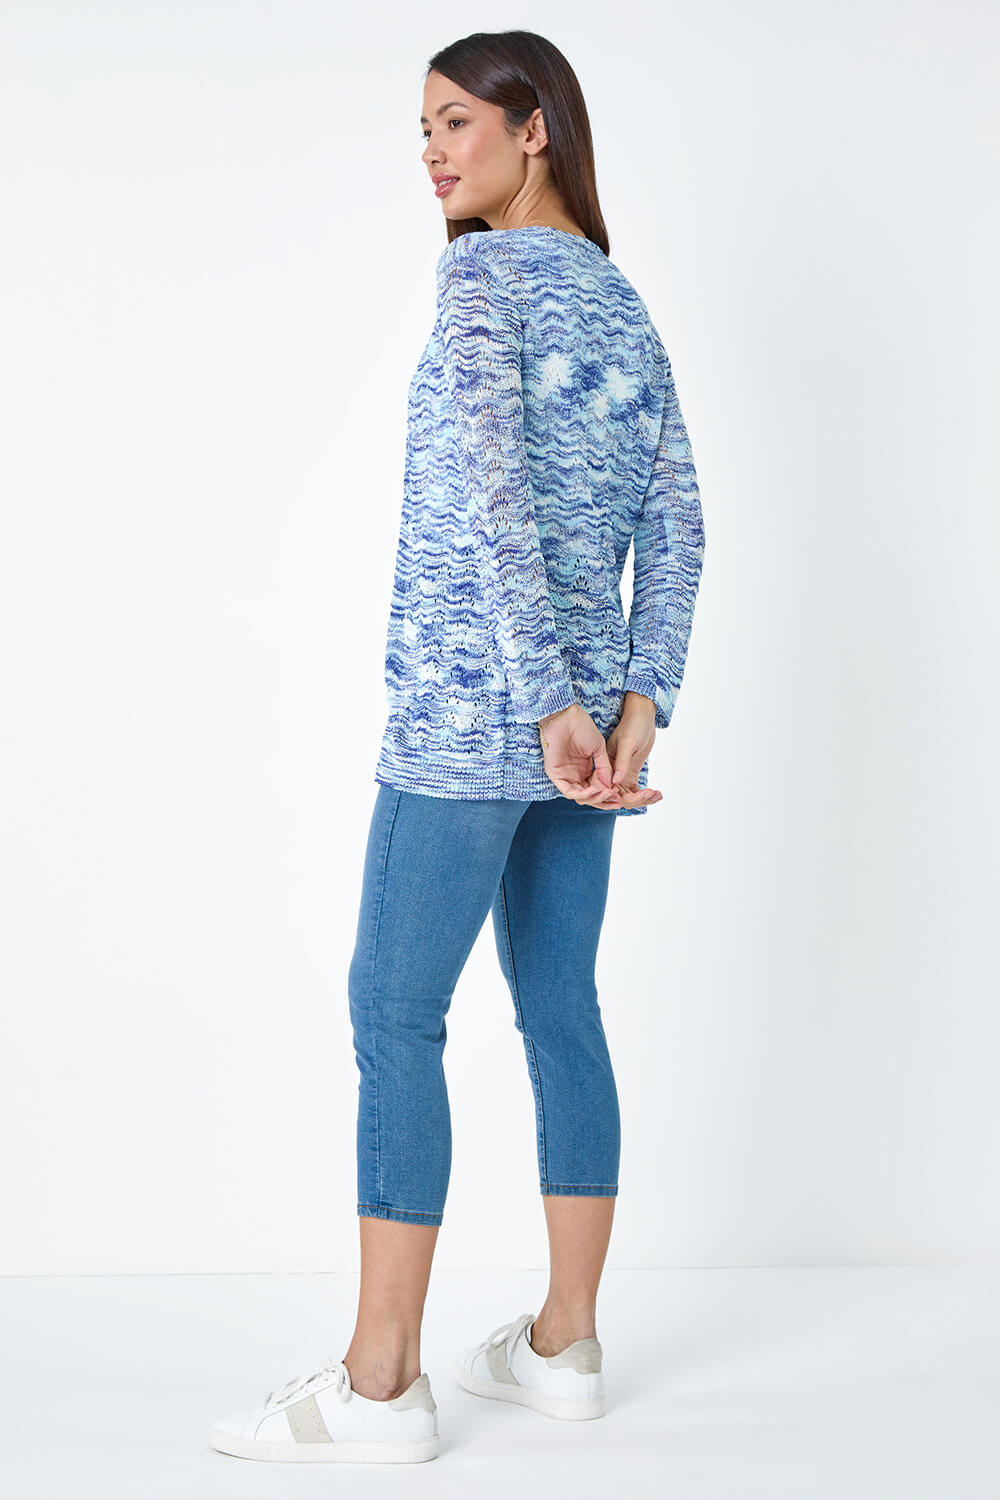 Blue Wave Print Pointelle Knit Cardigan, Image 3 of 5